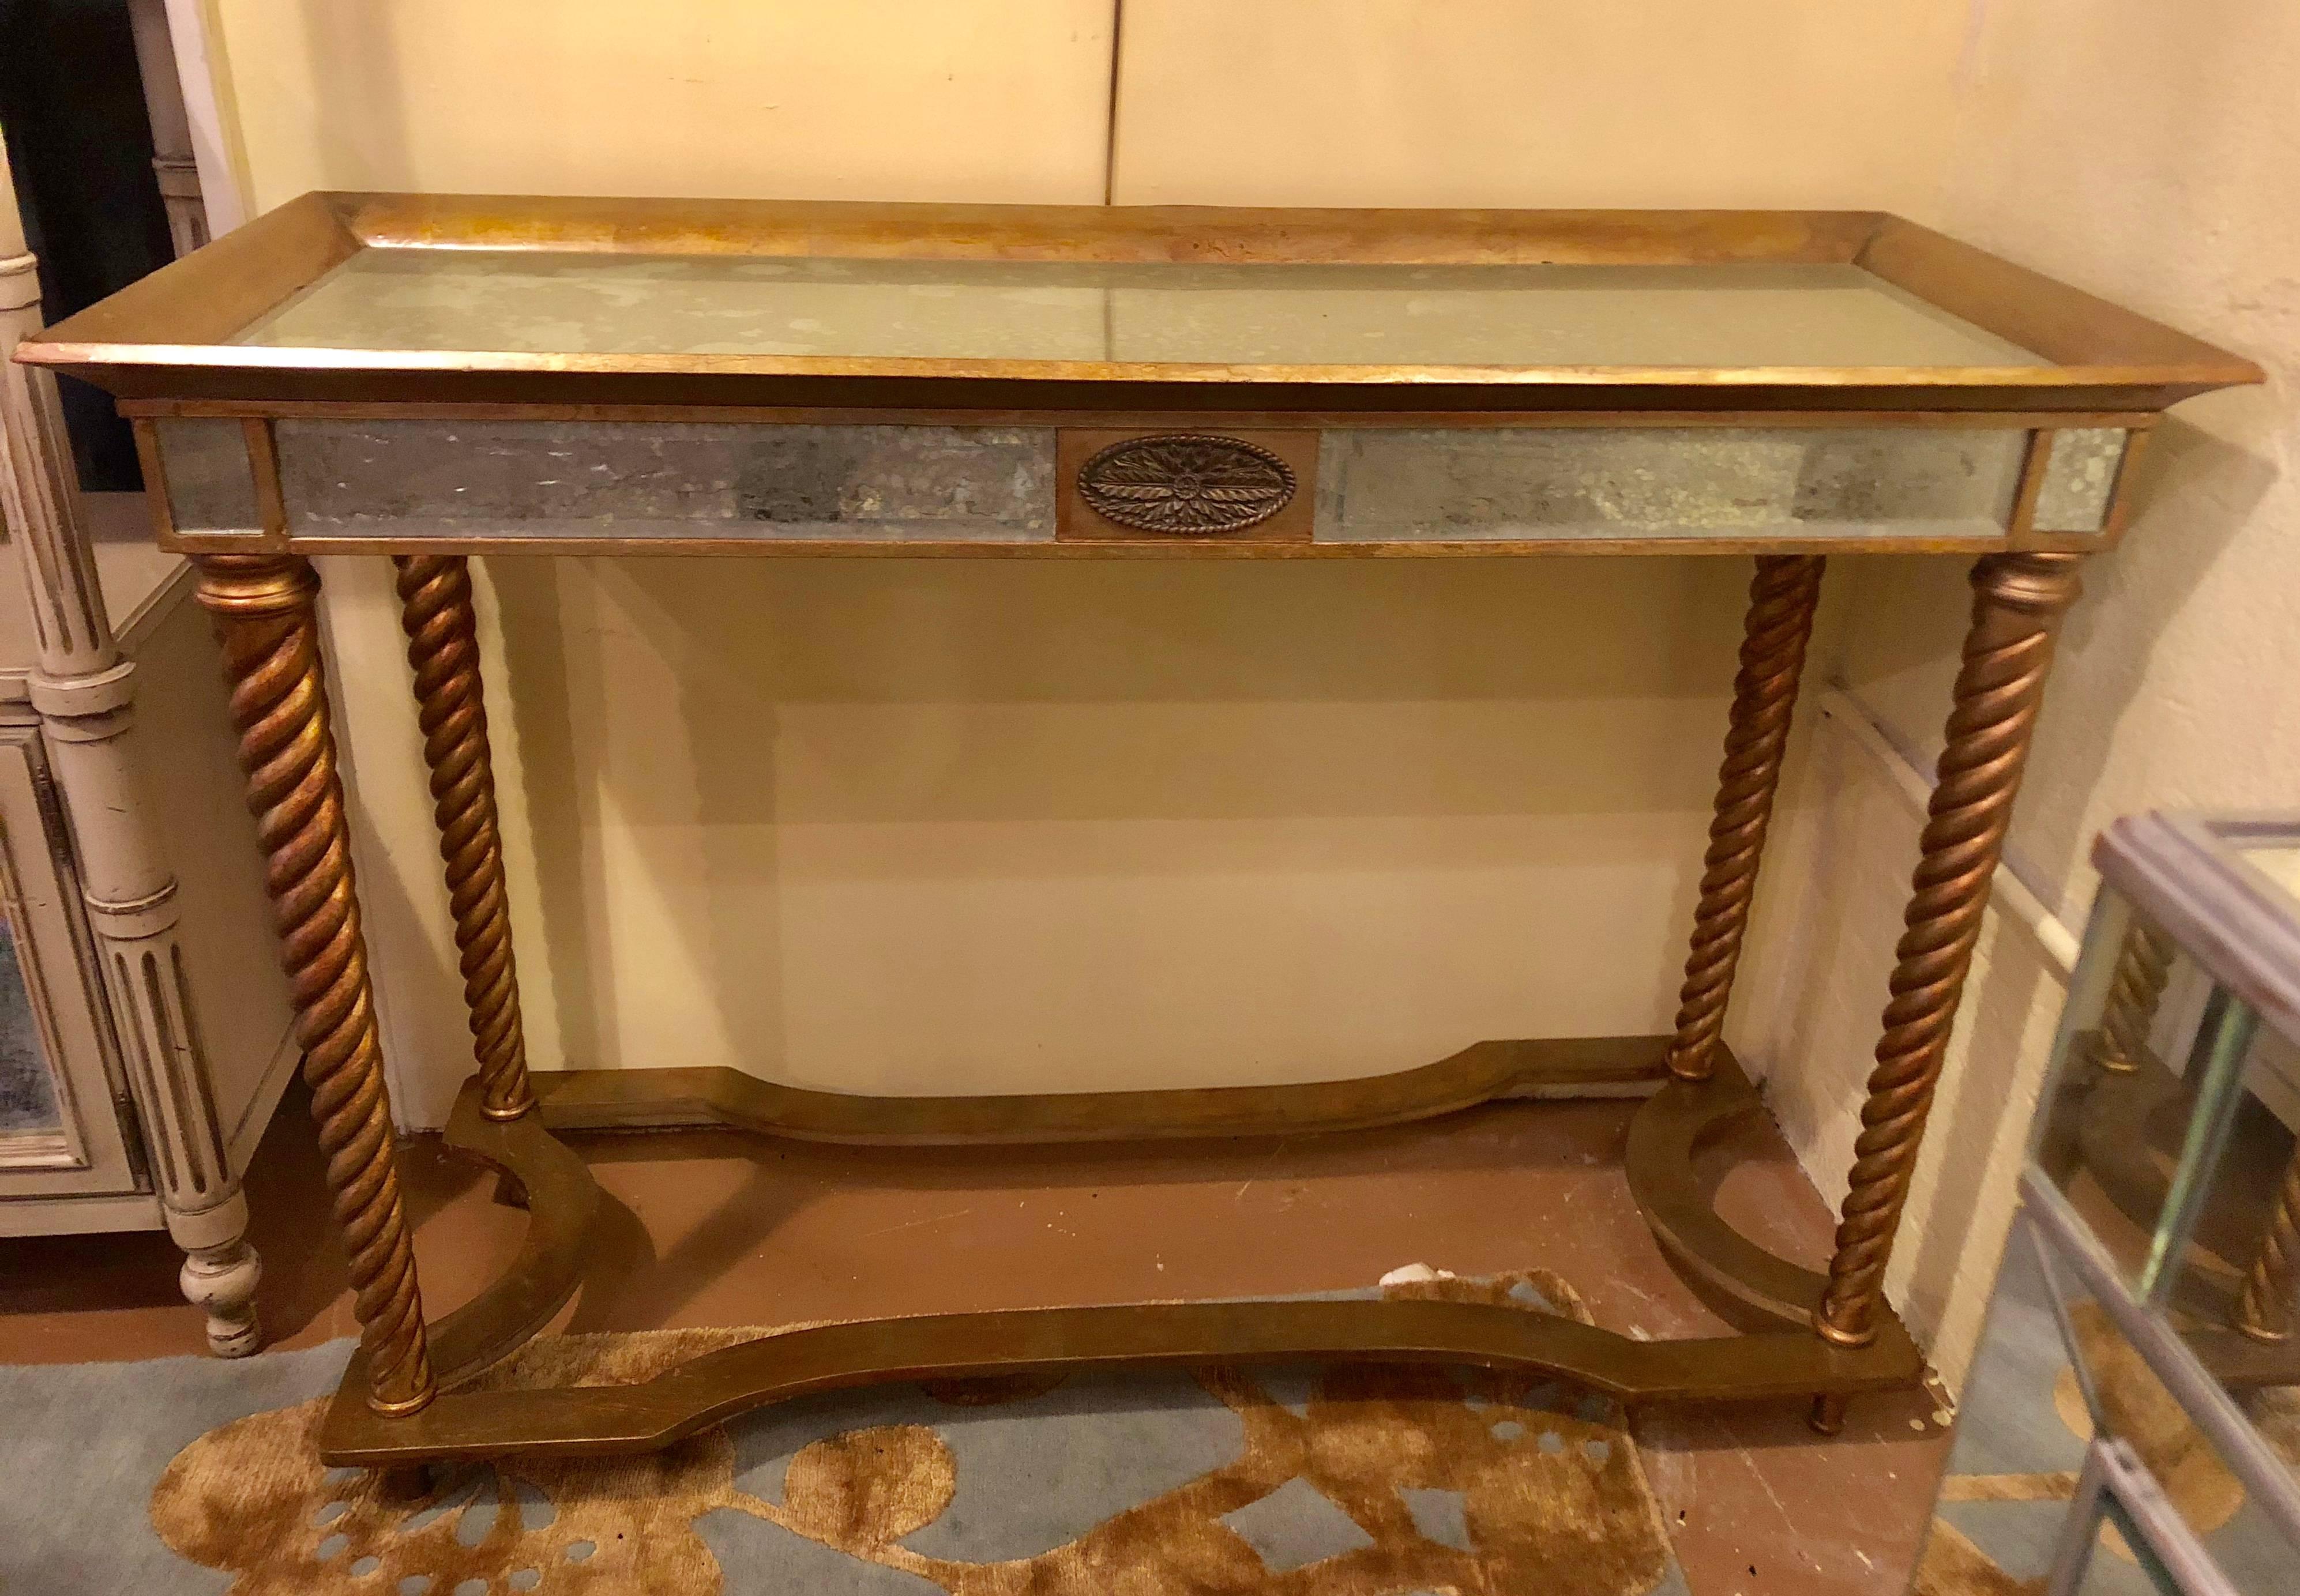 A mirrored console or sofa table with giltwood barley twist legs. From the Hollywood Regency Era comes this finely designed and detailed console or sofa table. The wood frame with mirrored top, apron and design.